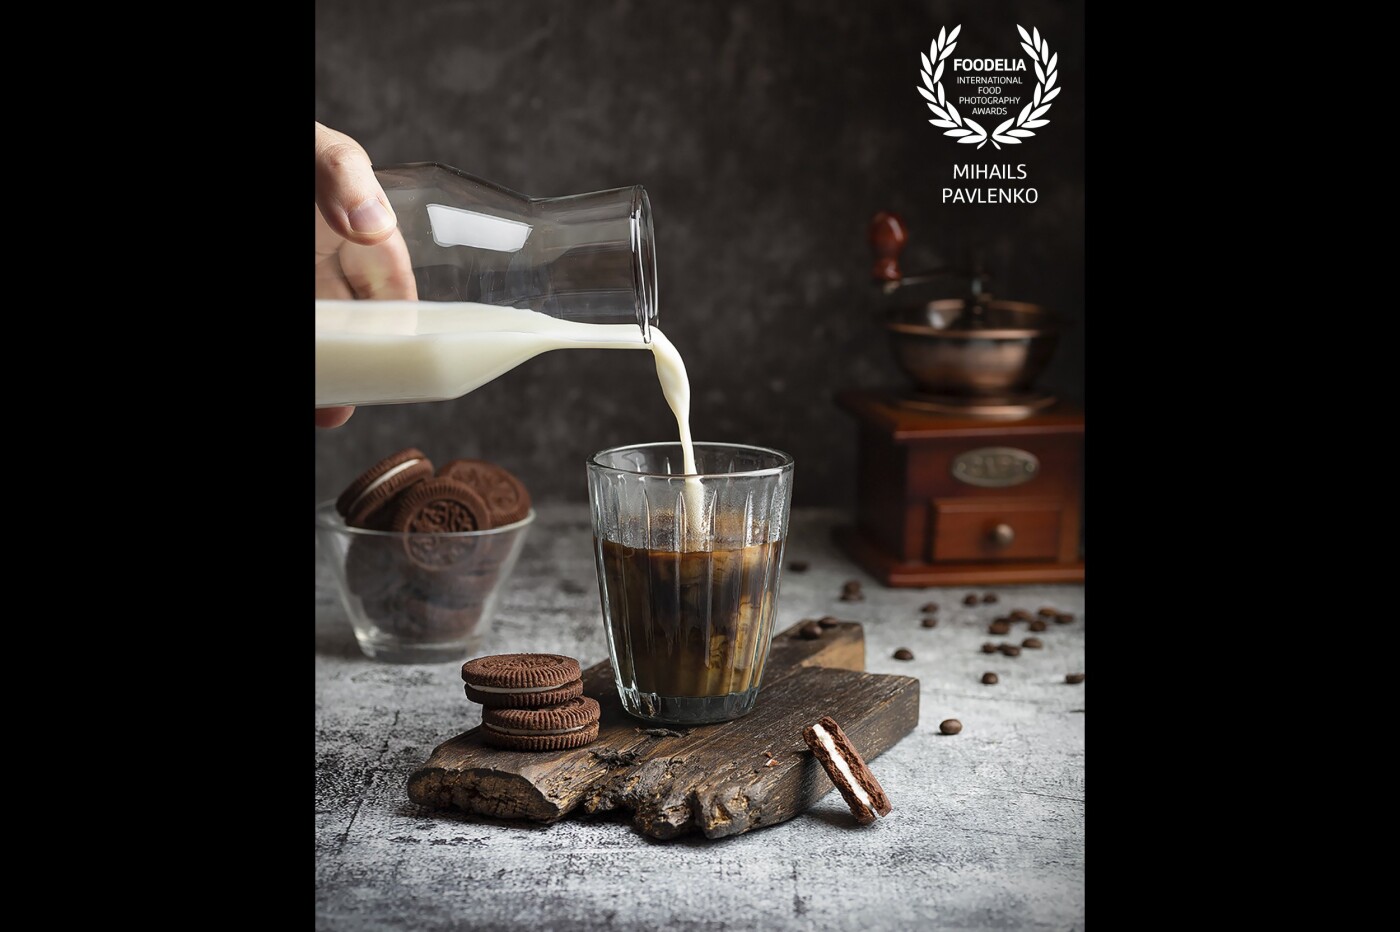 Preparation of tasty coffee drink. All that you need are well-roasted coffee beans, milk and some sweet cookies to extend satisfaction.<br />
